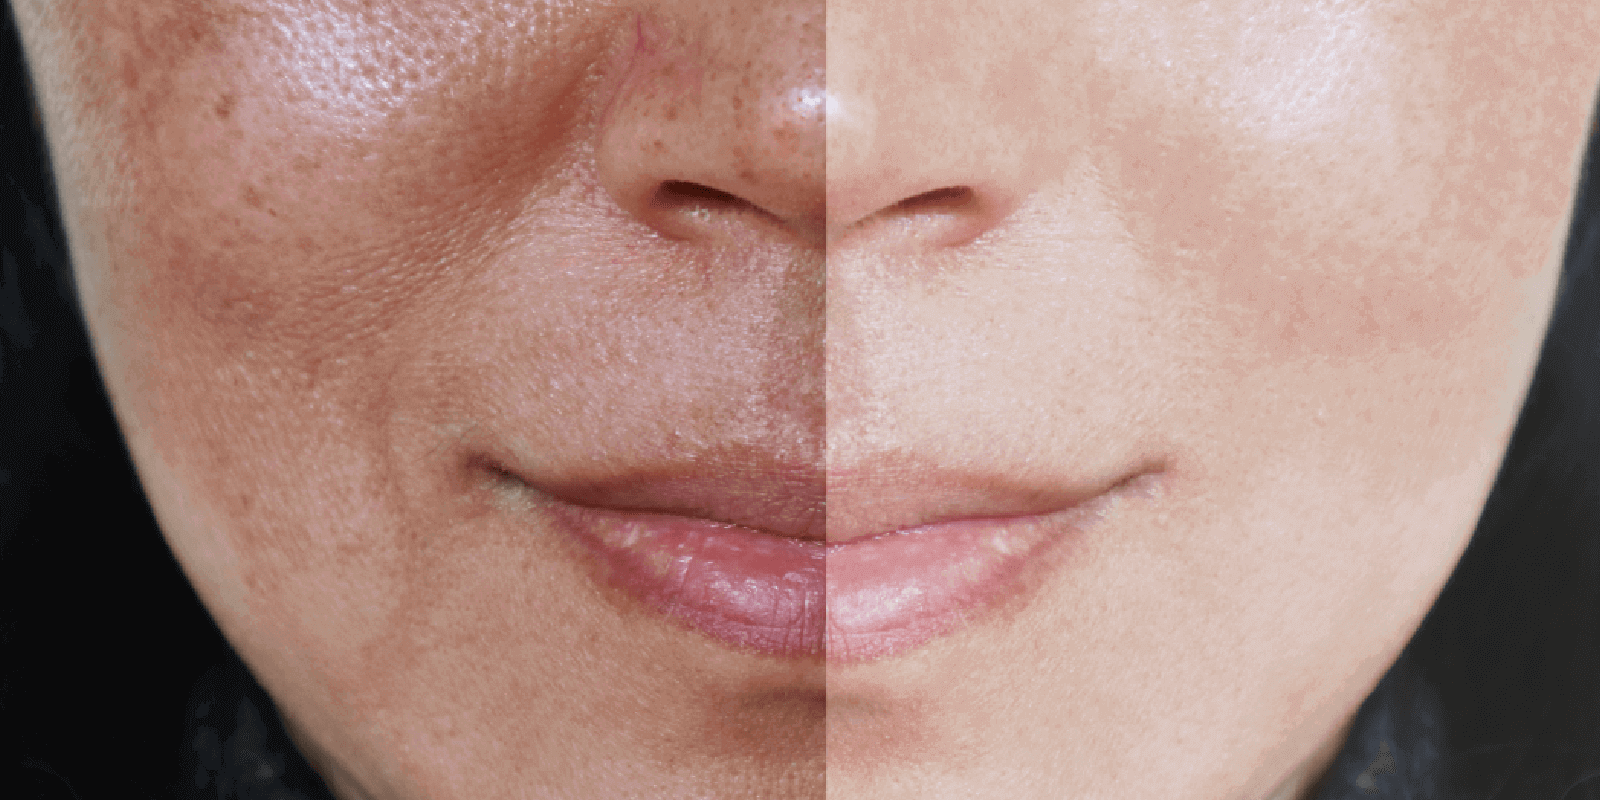 Overview of Melasma: Symptoms, diagnosis, and treatments